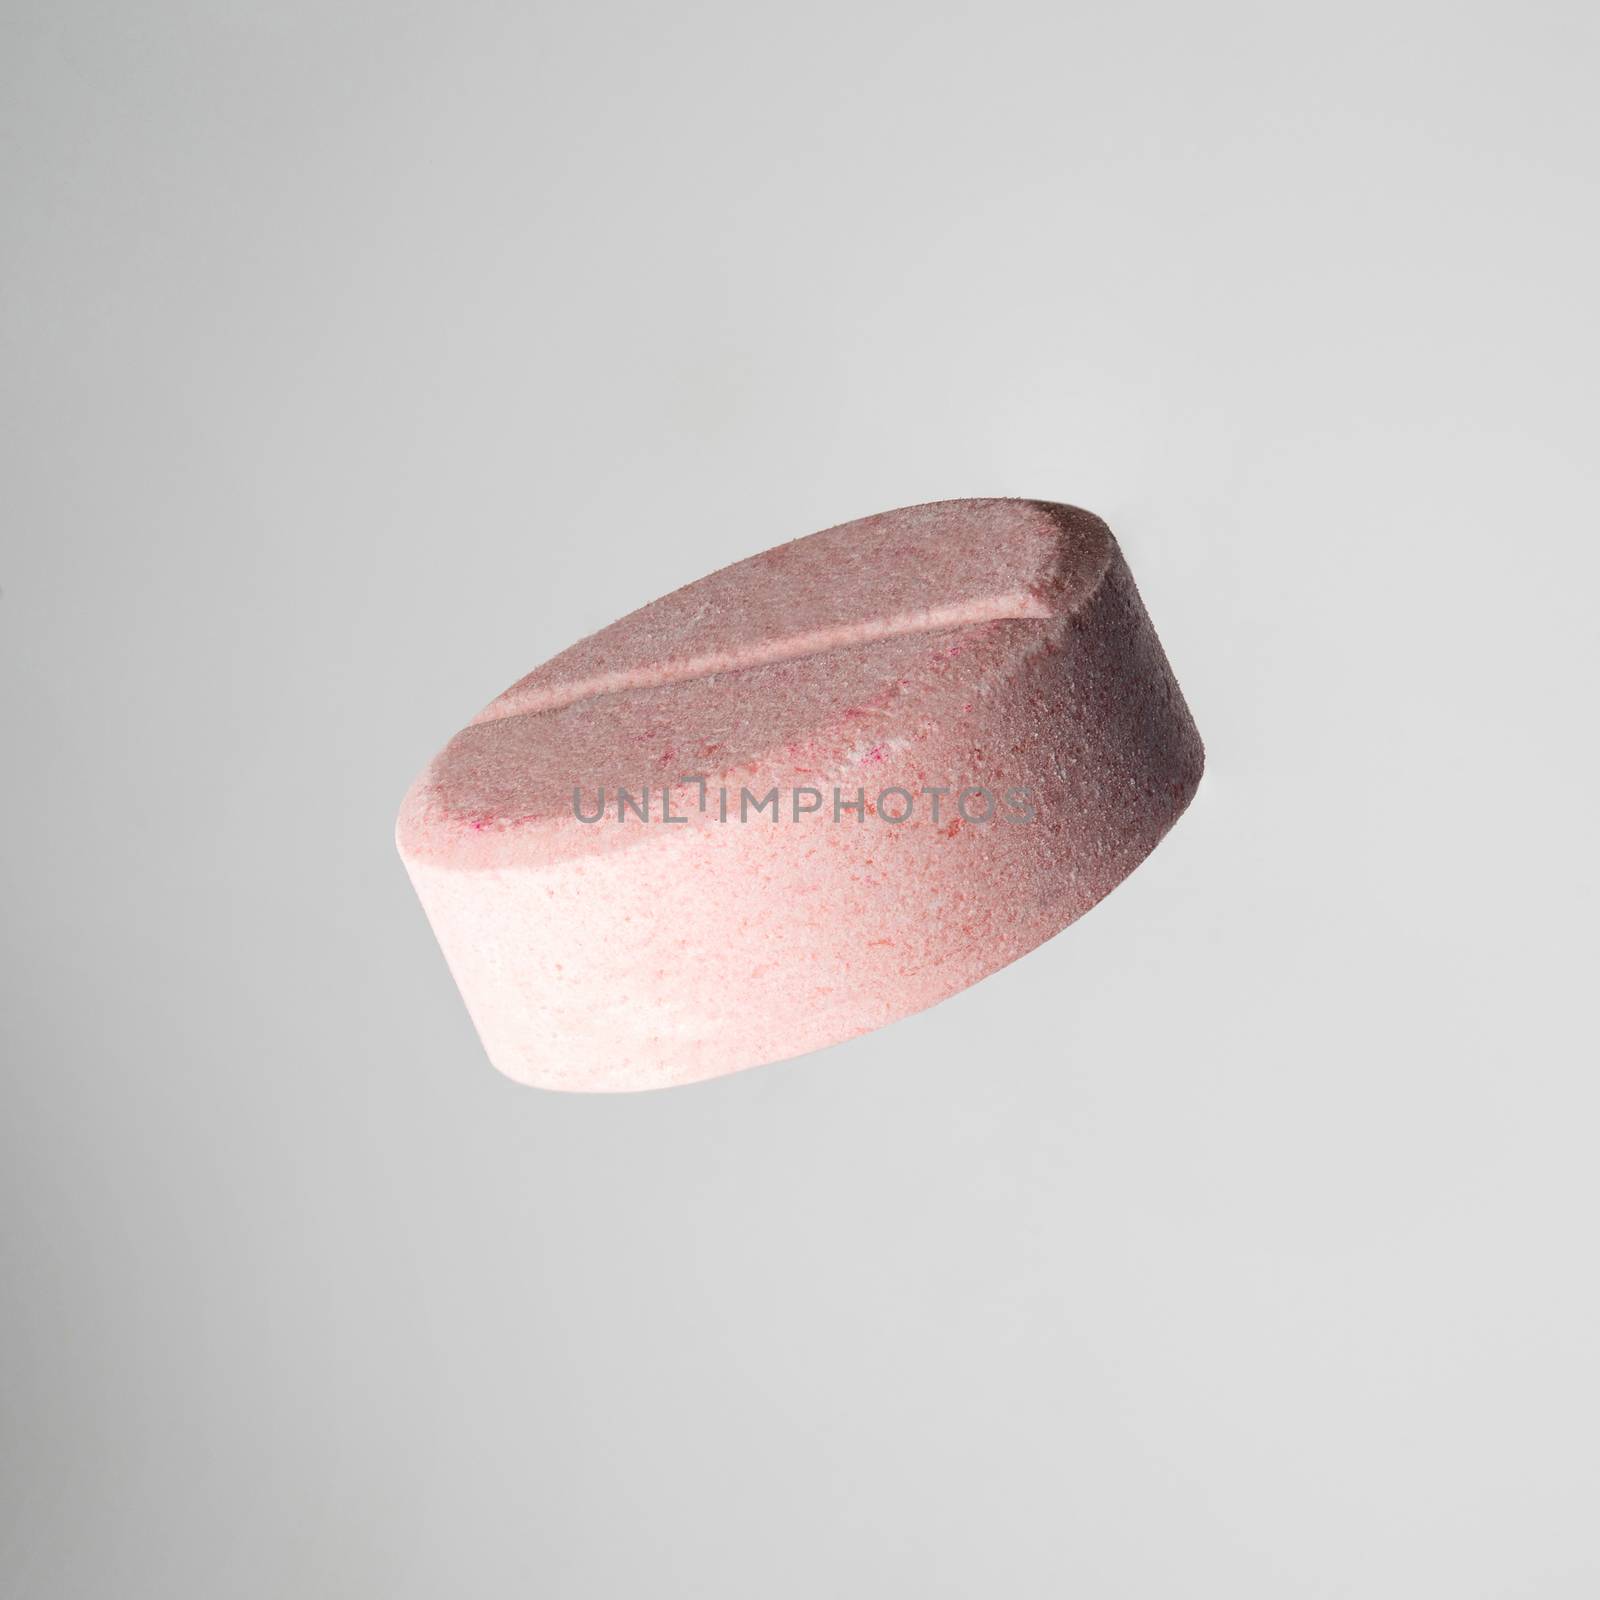 one pink medical ascorbic pill on light grey background. Isolated, close-up